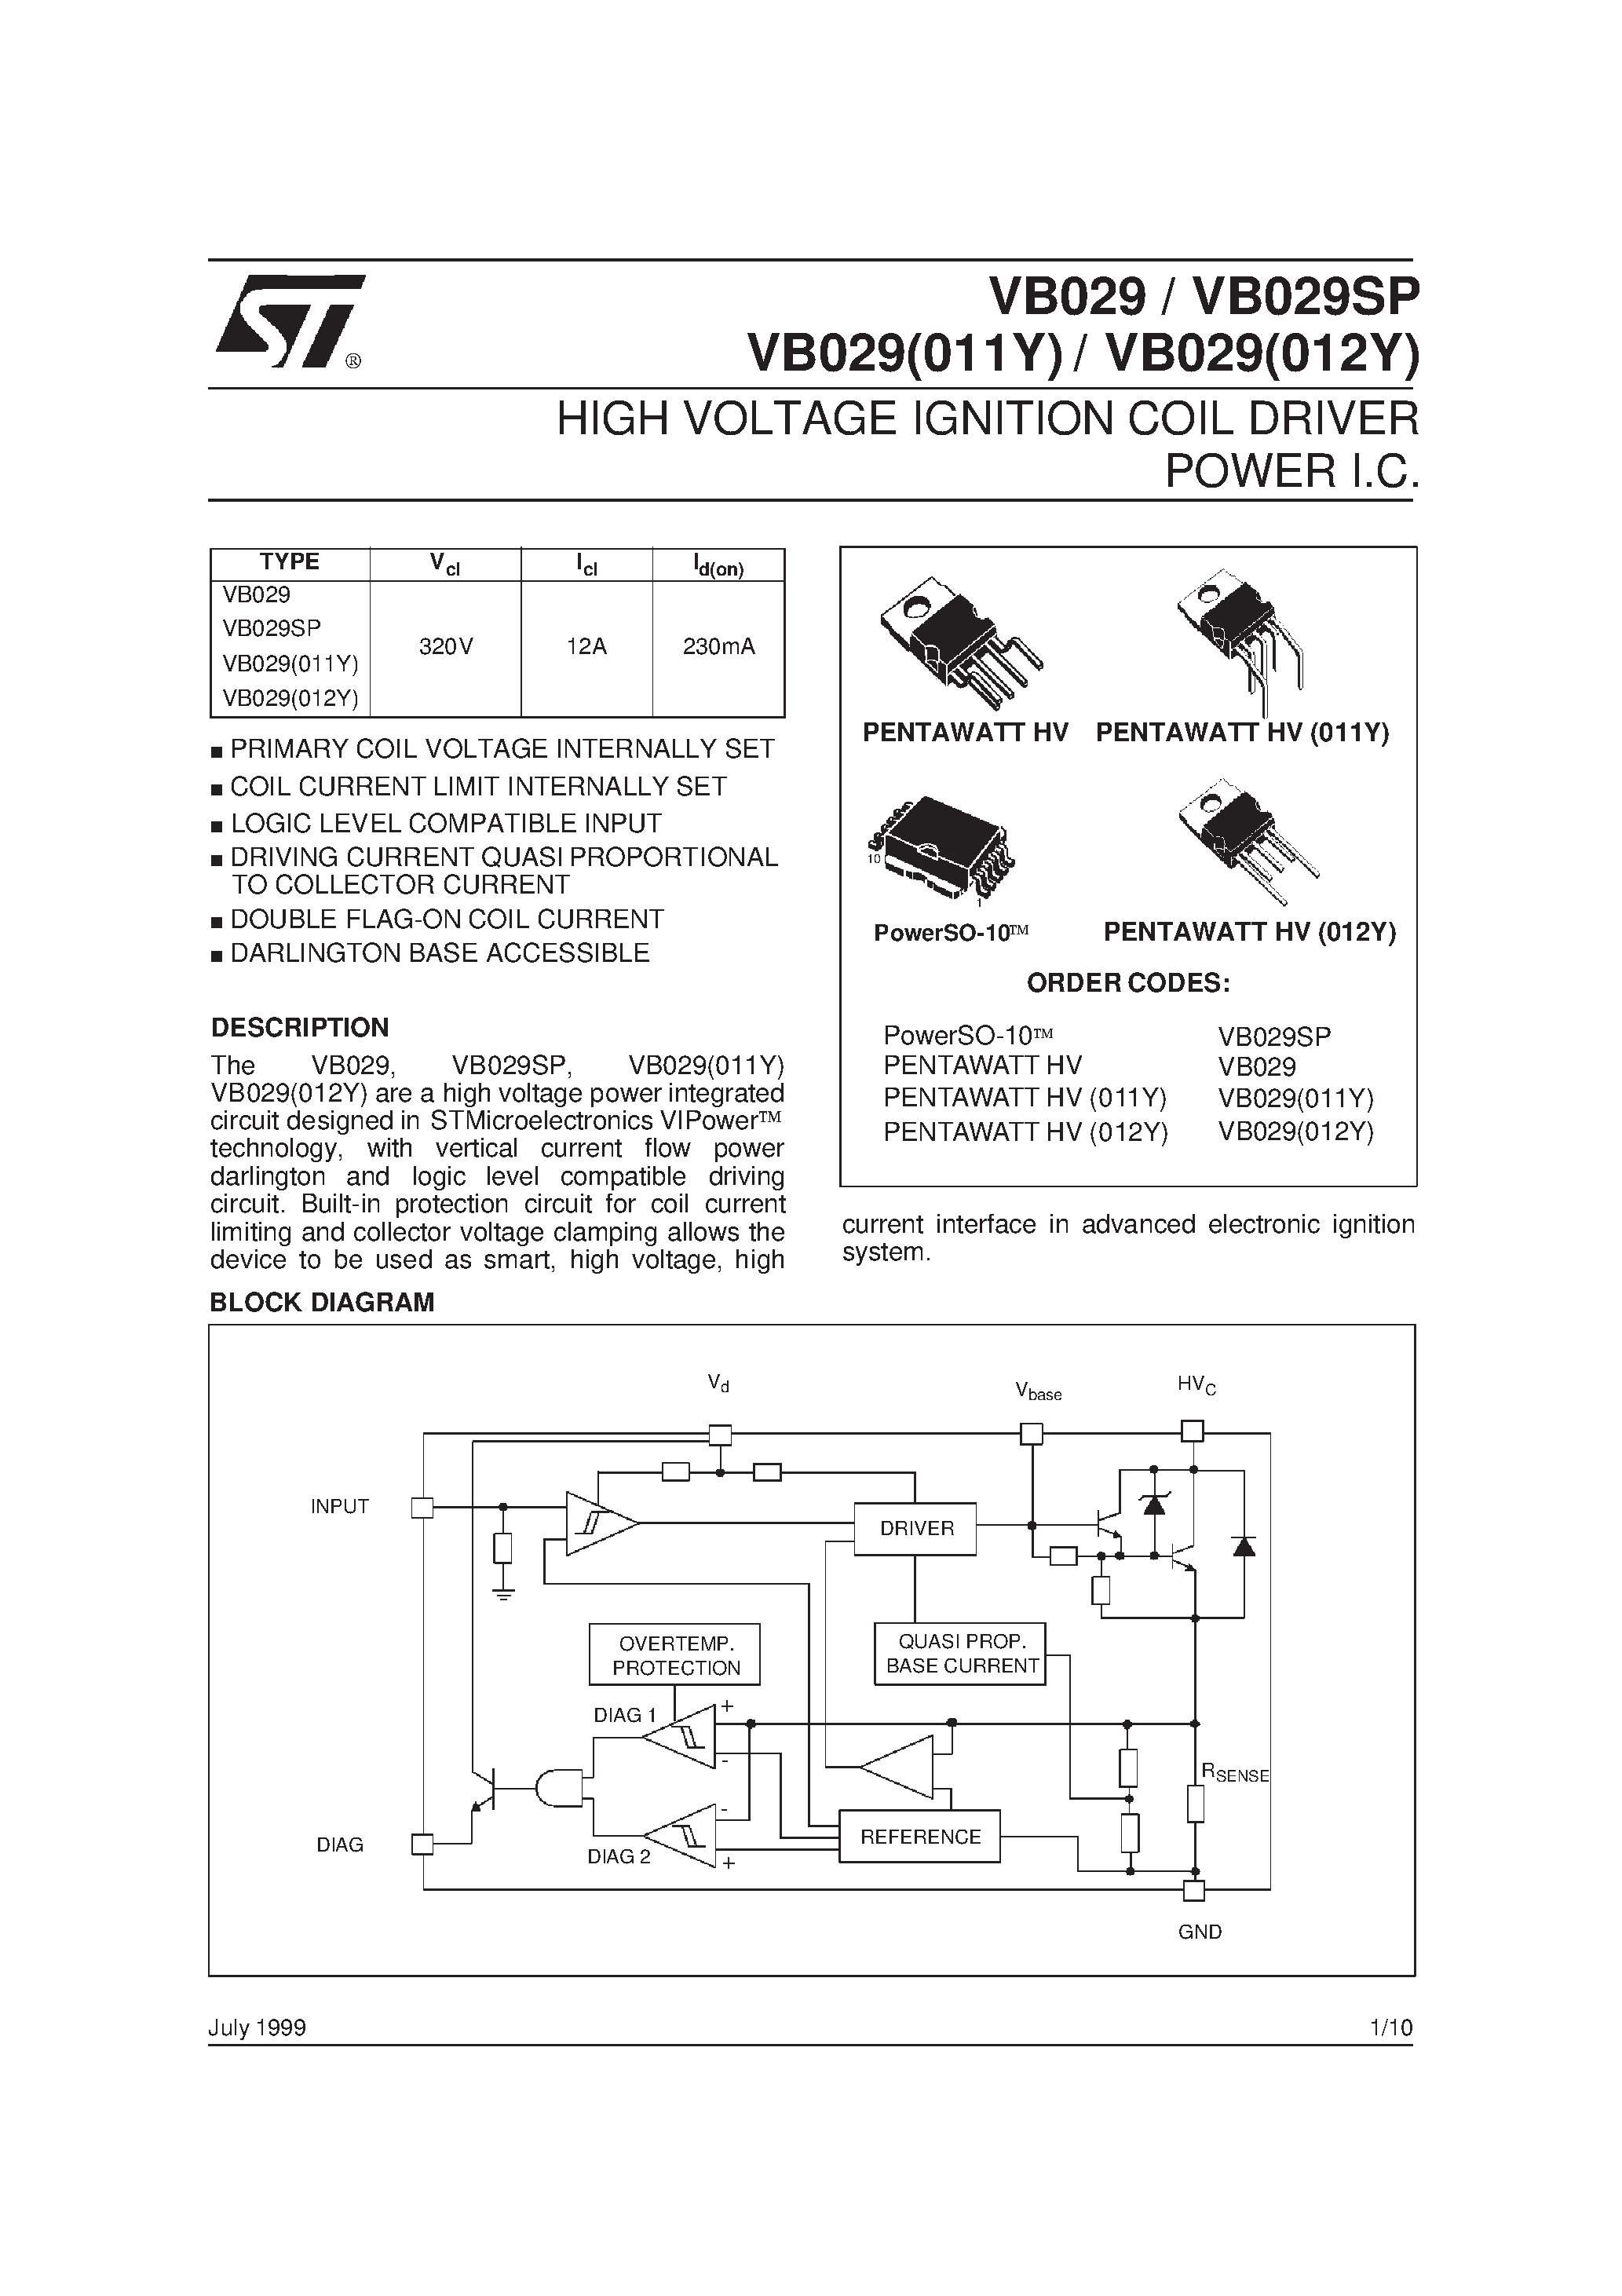 Datasheet VB029(012Y) - HIGH VOLTAGE IGNITION COIL DRIVER POWER I.C. page 1